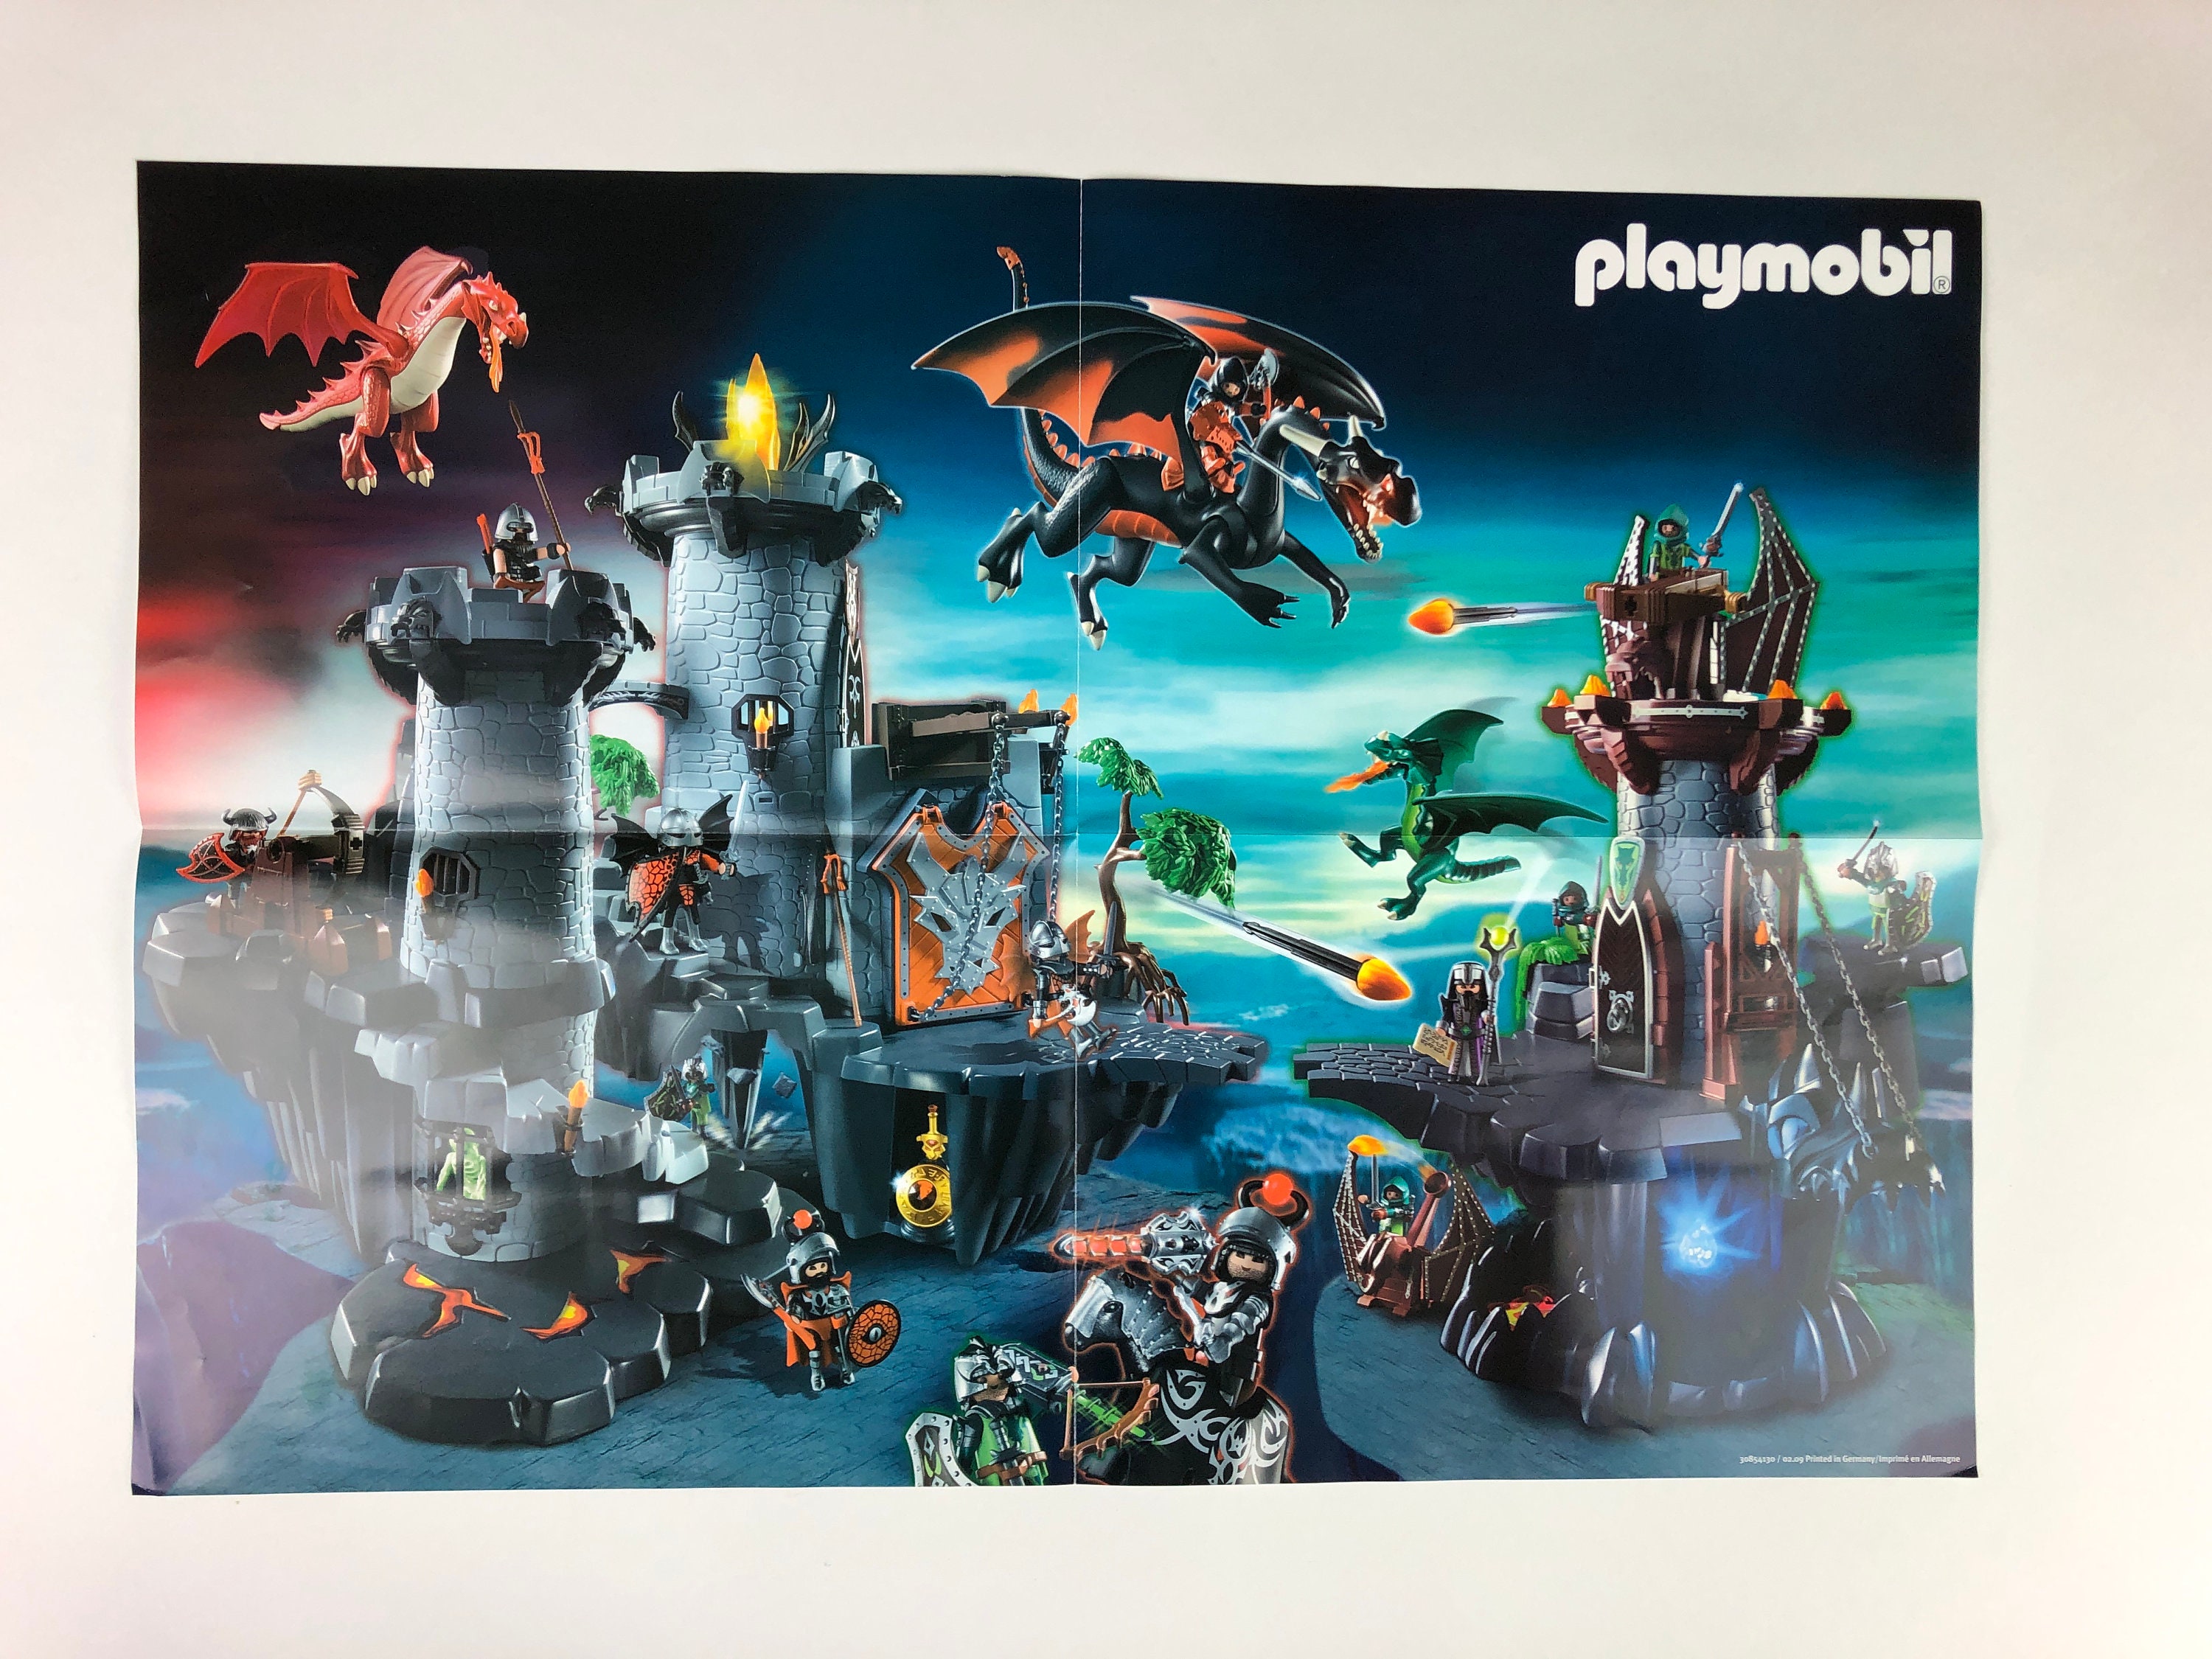 pianist konsol astronomi Playmobil Poster of Knights Versus Dragons Suitable for - Etsy